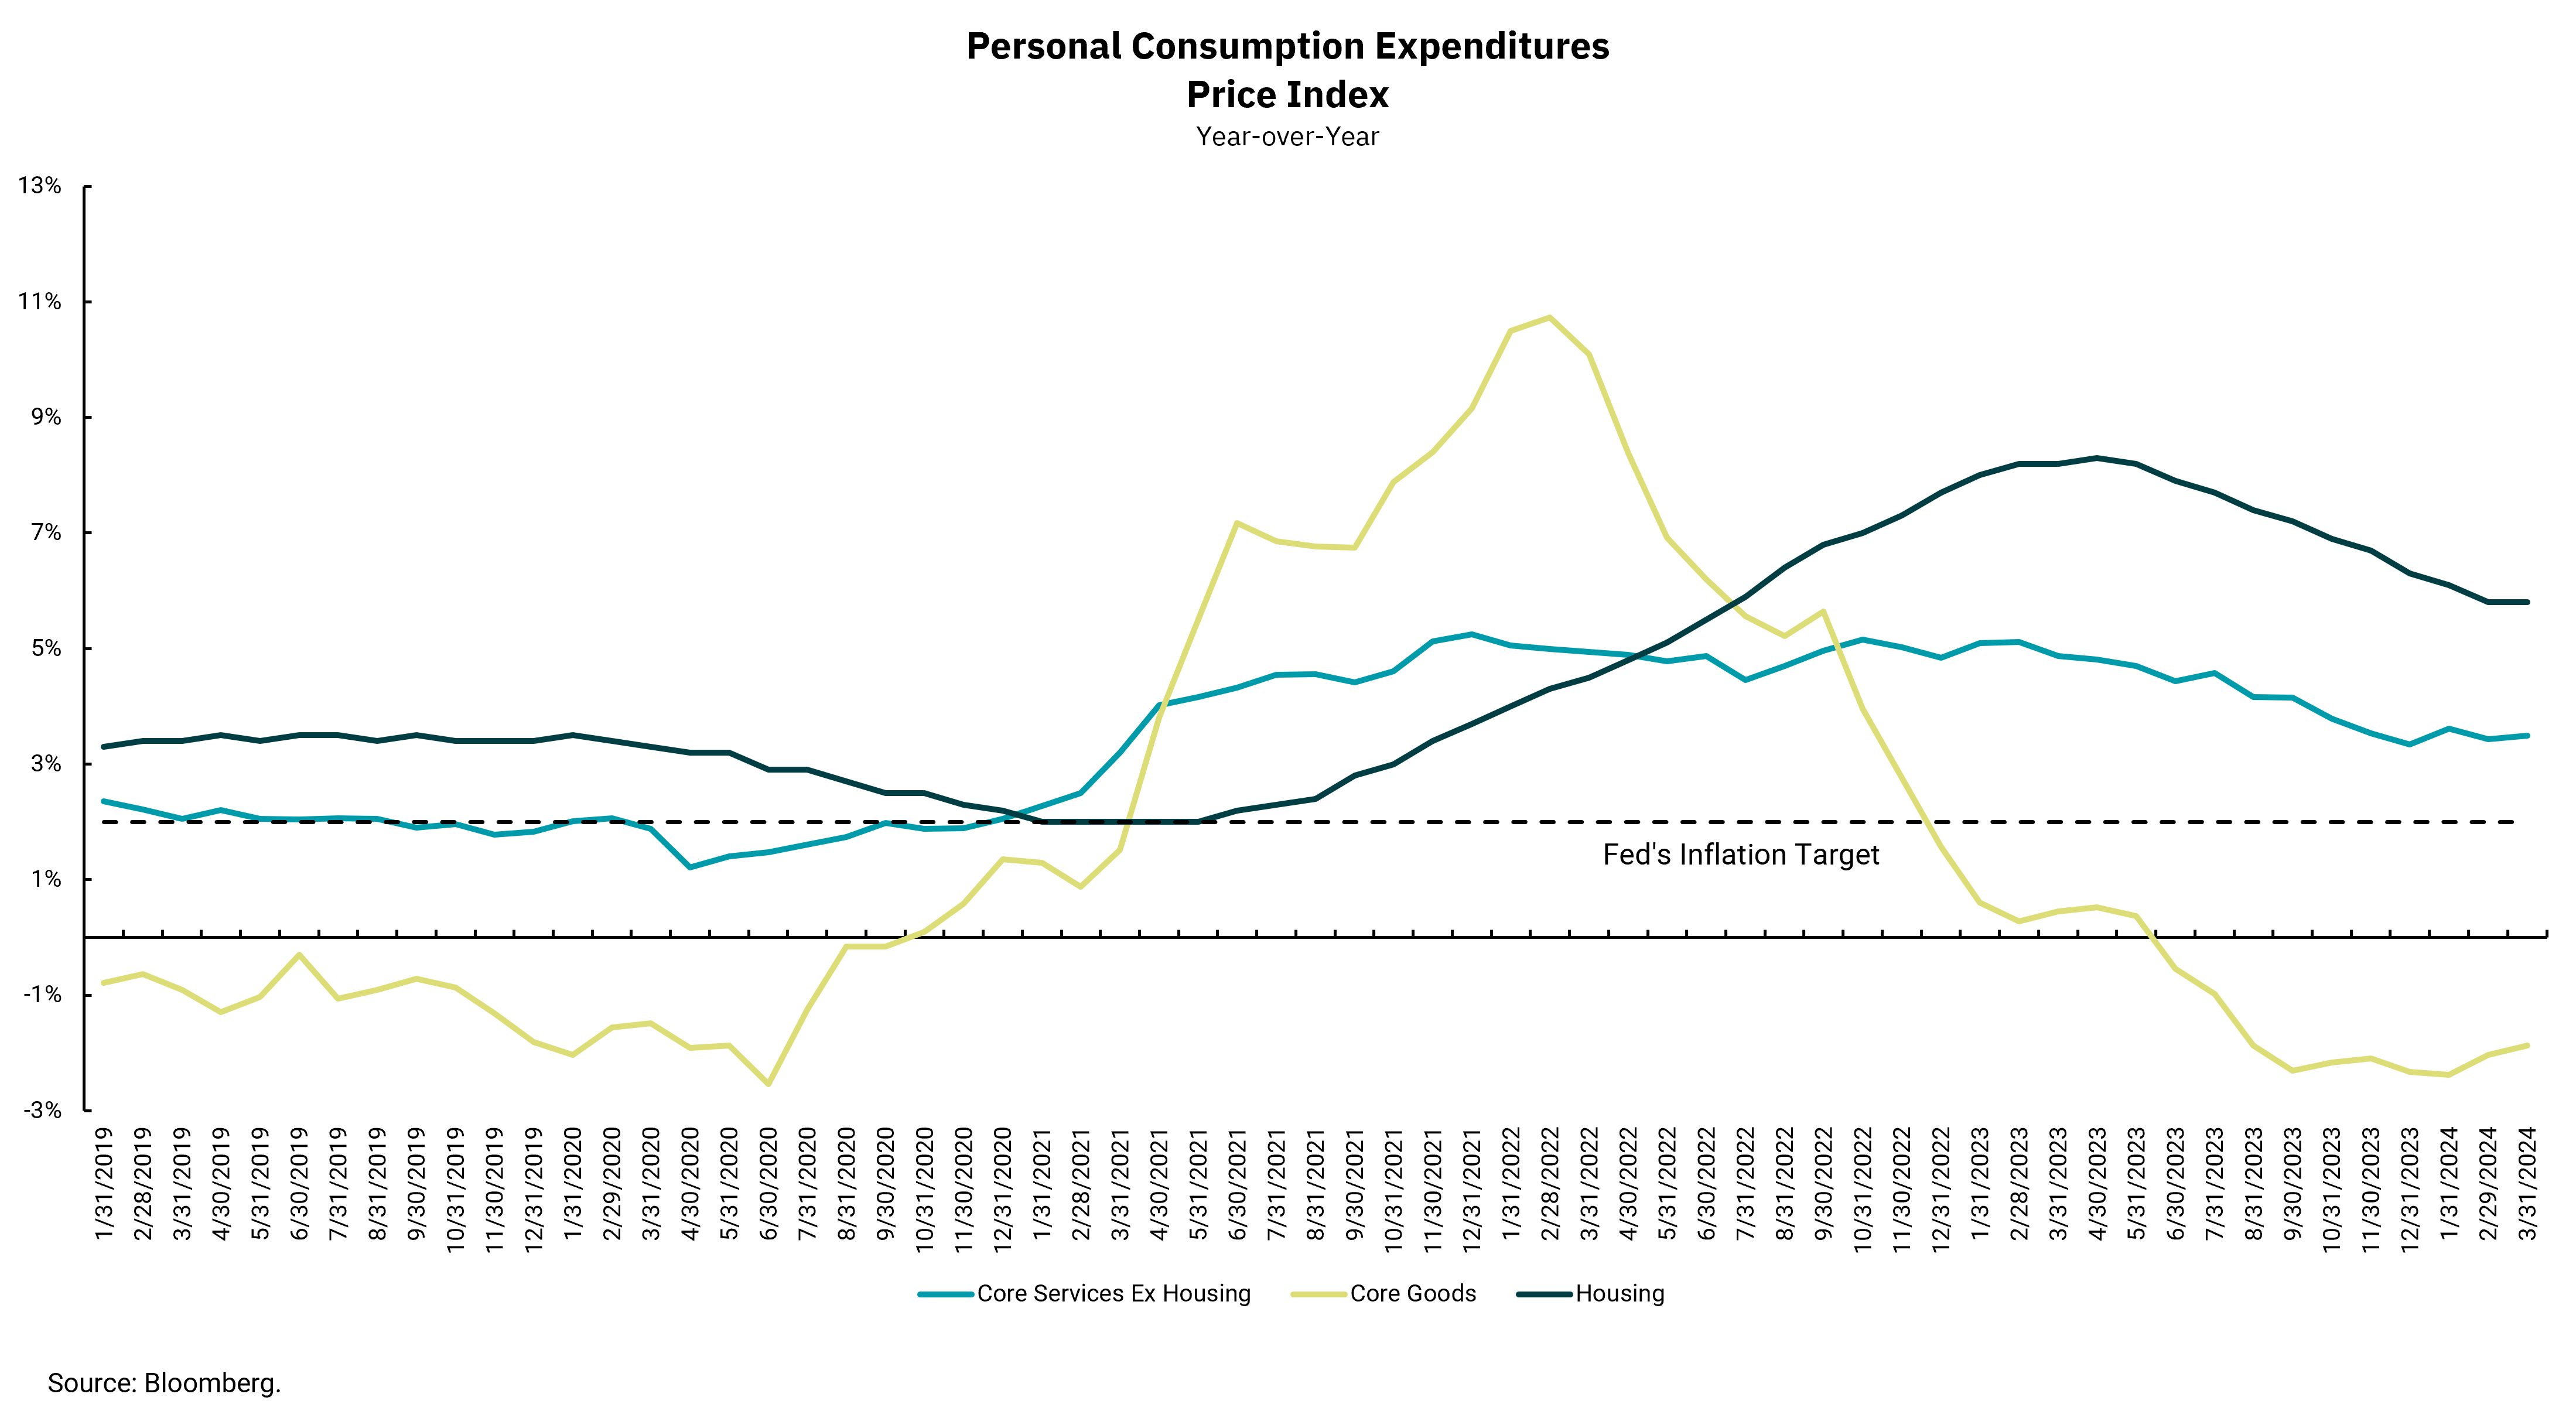 Personal Consumption Expenditures Price Index YOY from January 2019